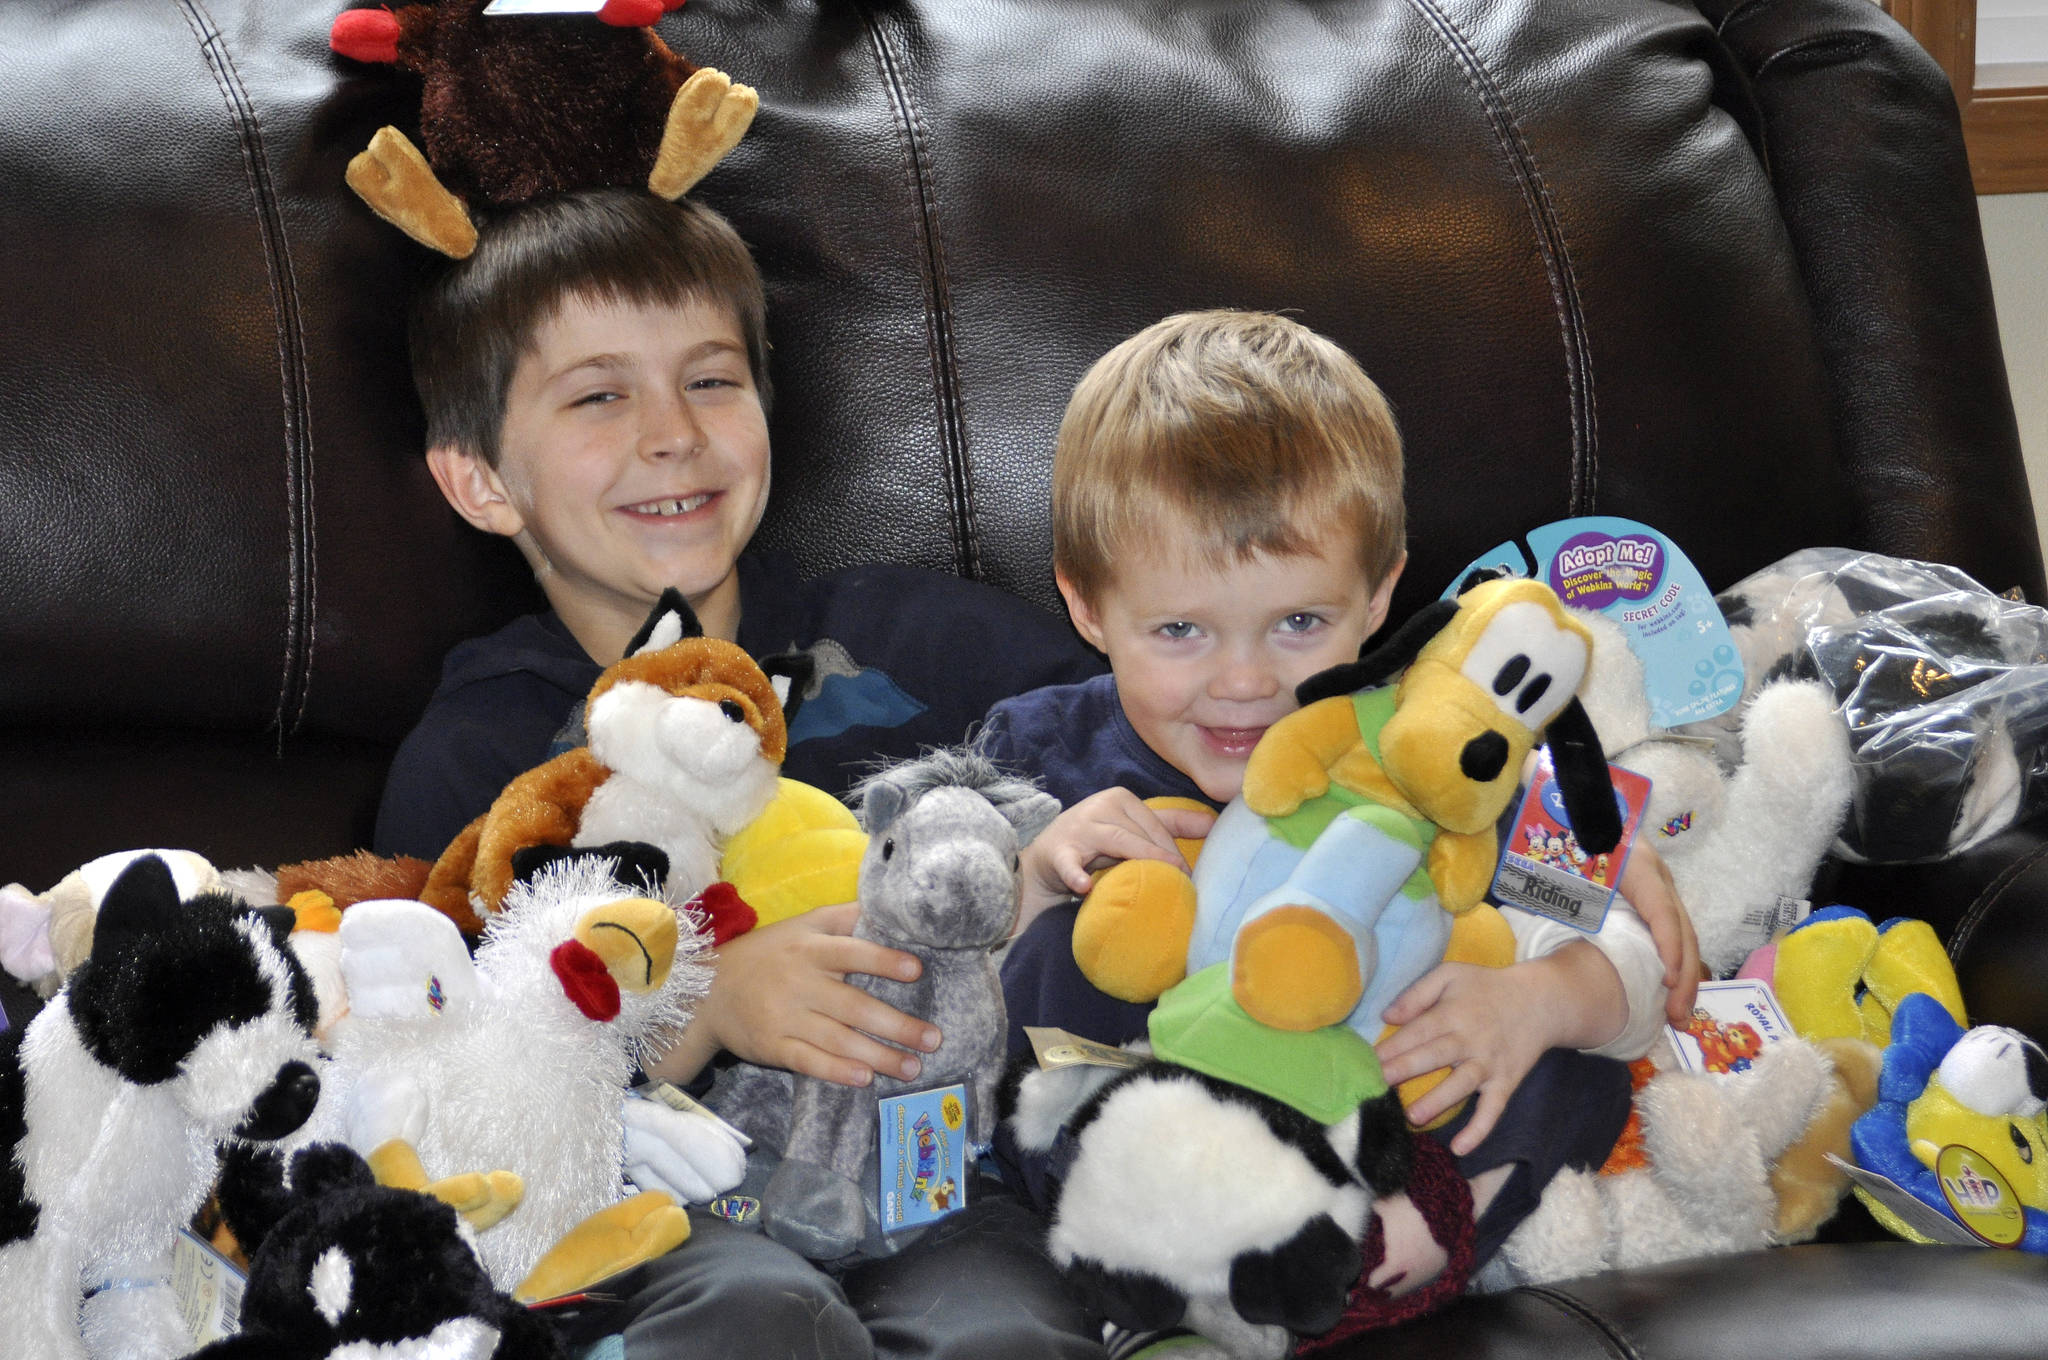 From left, Zachary Darner and Noah Darner sit among some of the early toys collected for Kidzz Helping Kidzz 2017. As of Dec. 5, Zachary collected more than 500 toys, and hopes to collect 500 more before time is up Dec. 18.                                Michelle Beahm / Kitsap News Group